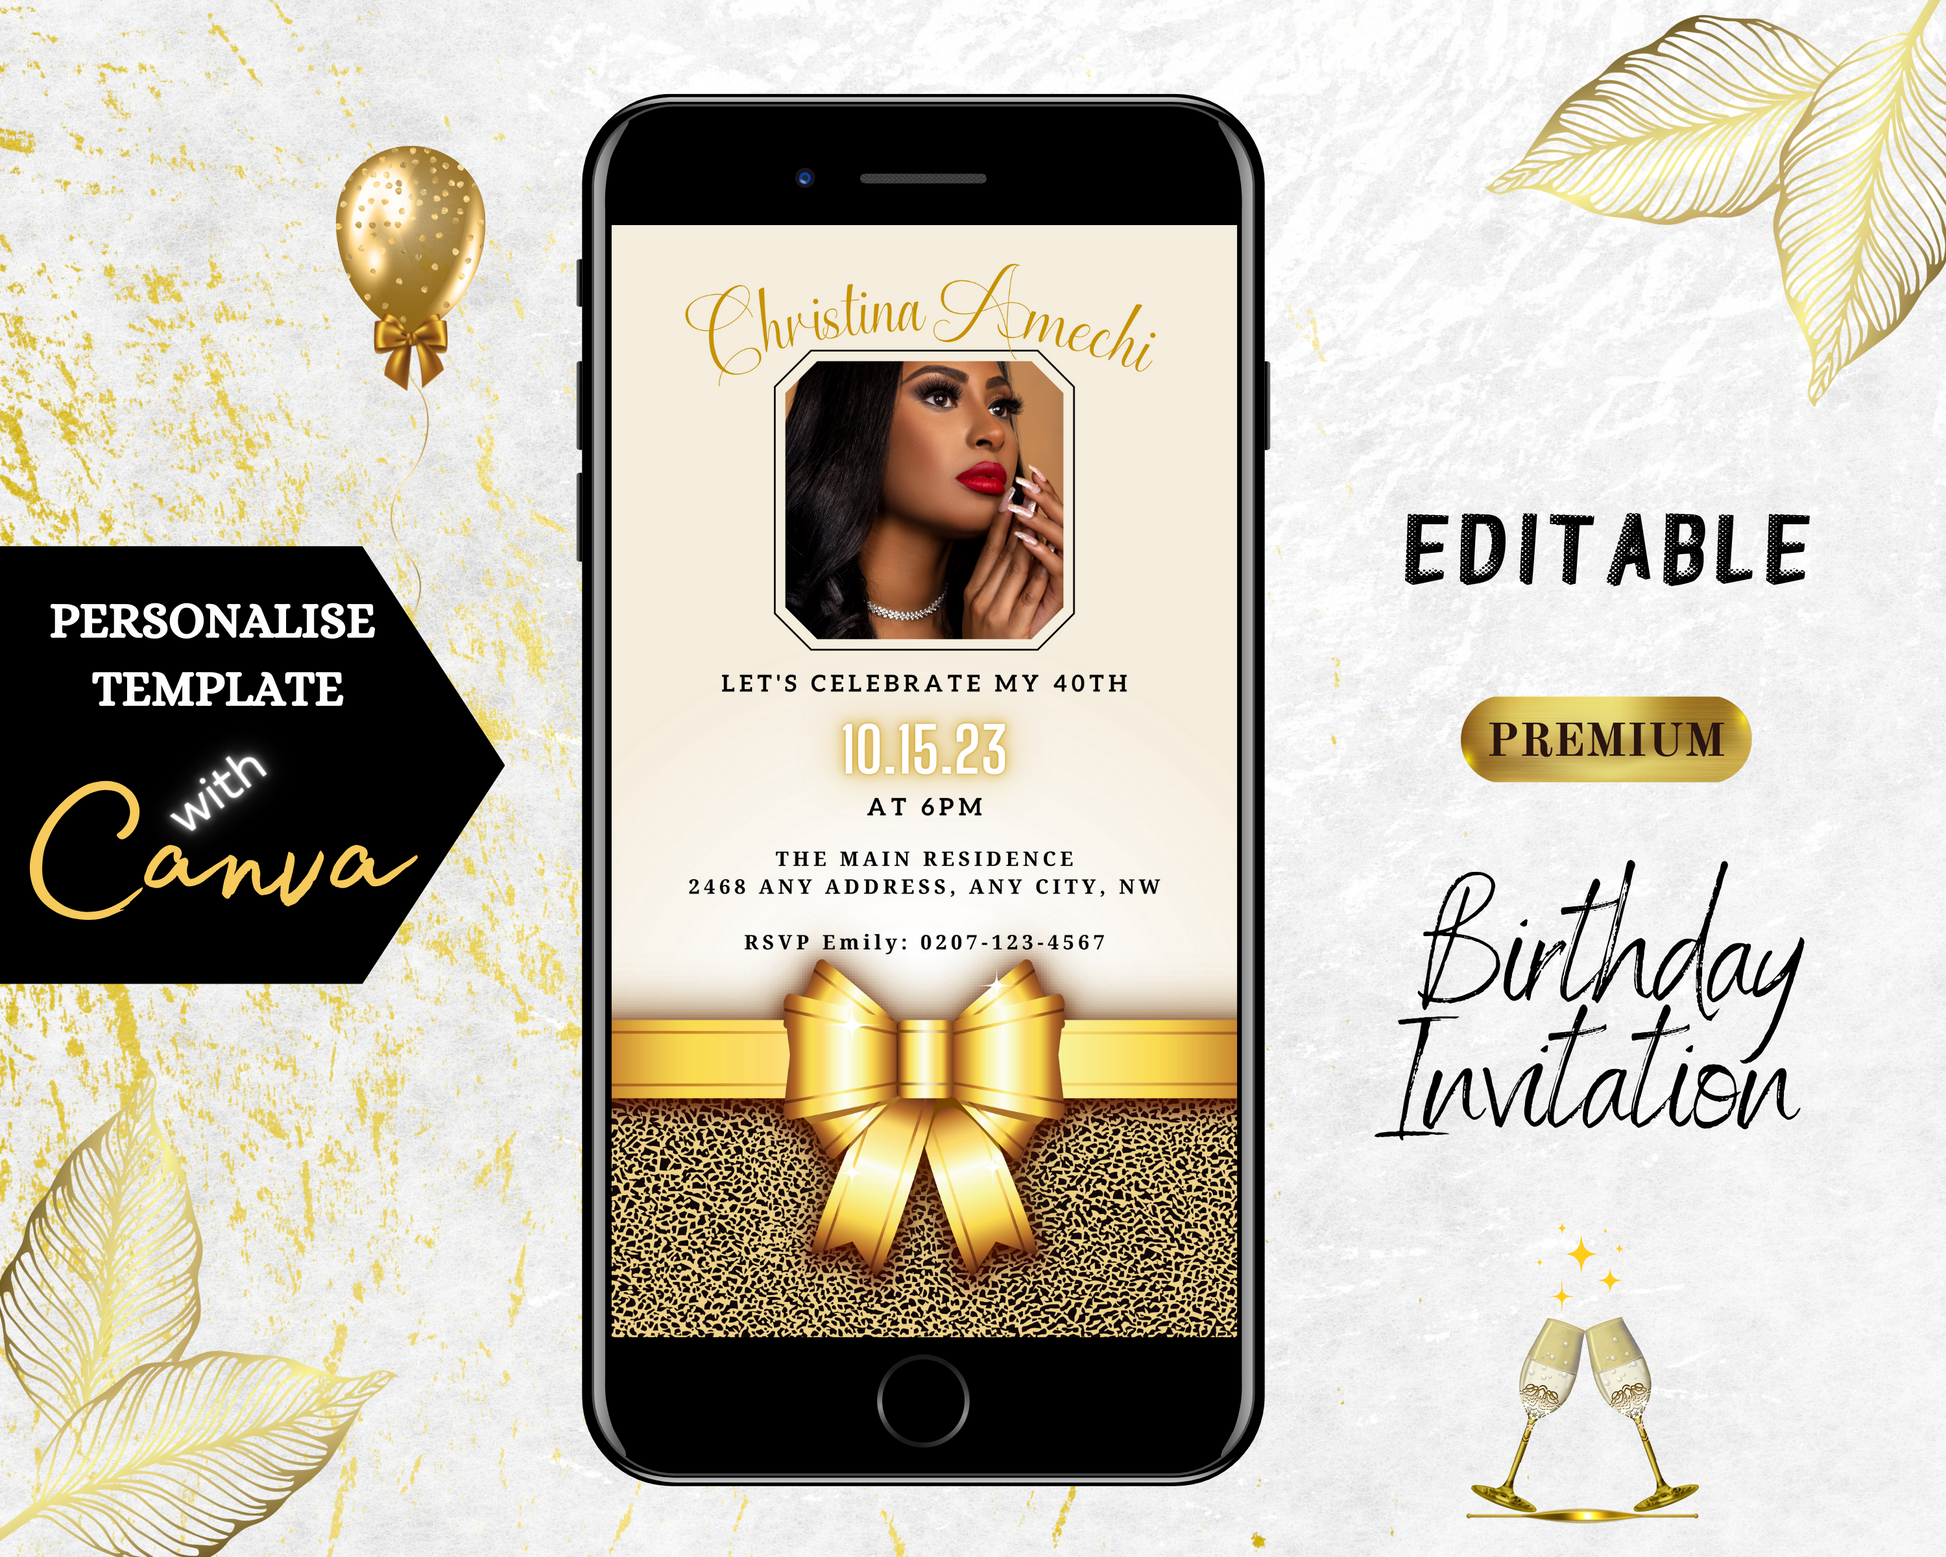 Customisable Beige Gold Leopard Digital 40th Birthday Evite on a smartphone screen, featuring a woman's photo and a gold bow, editable via Canva.